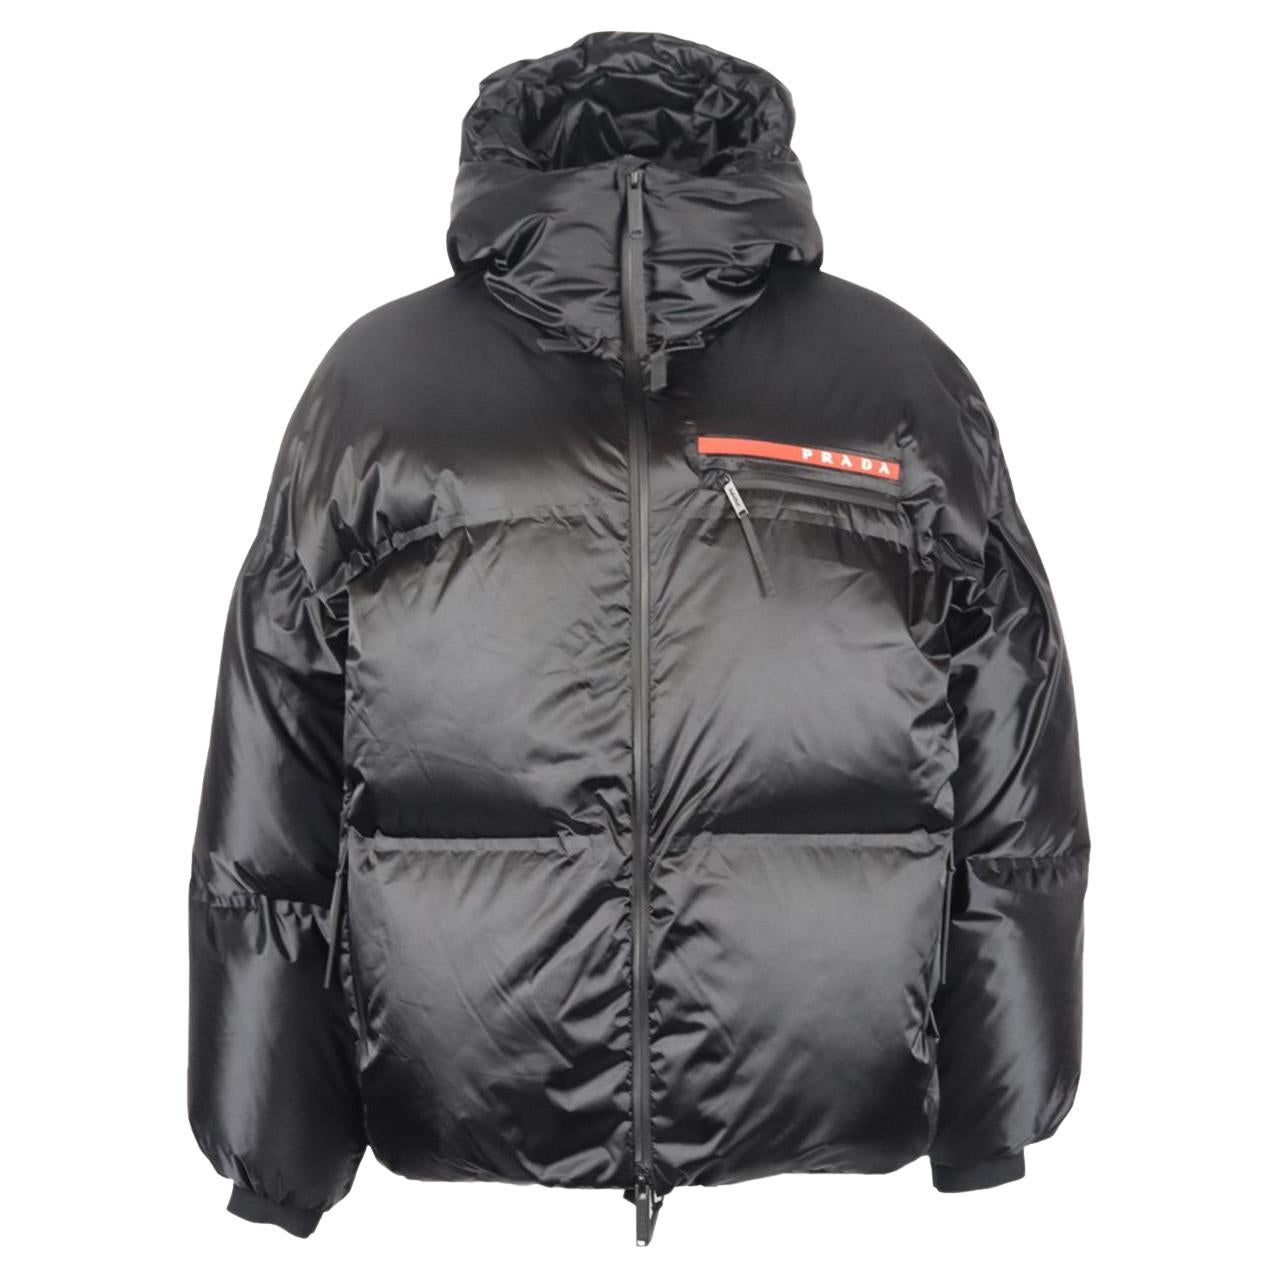 Prada Oversized Hooded Quilted Shell Down Jacket Xsmall